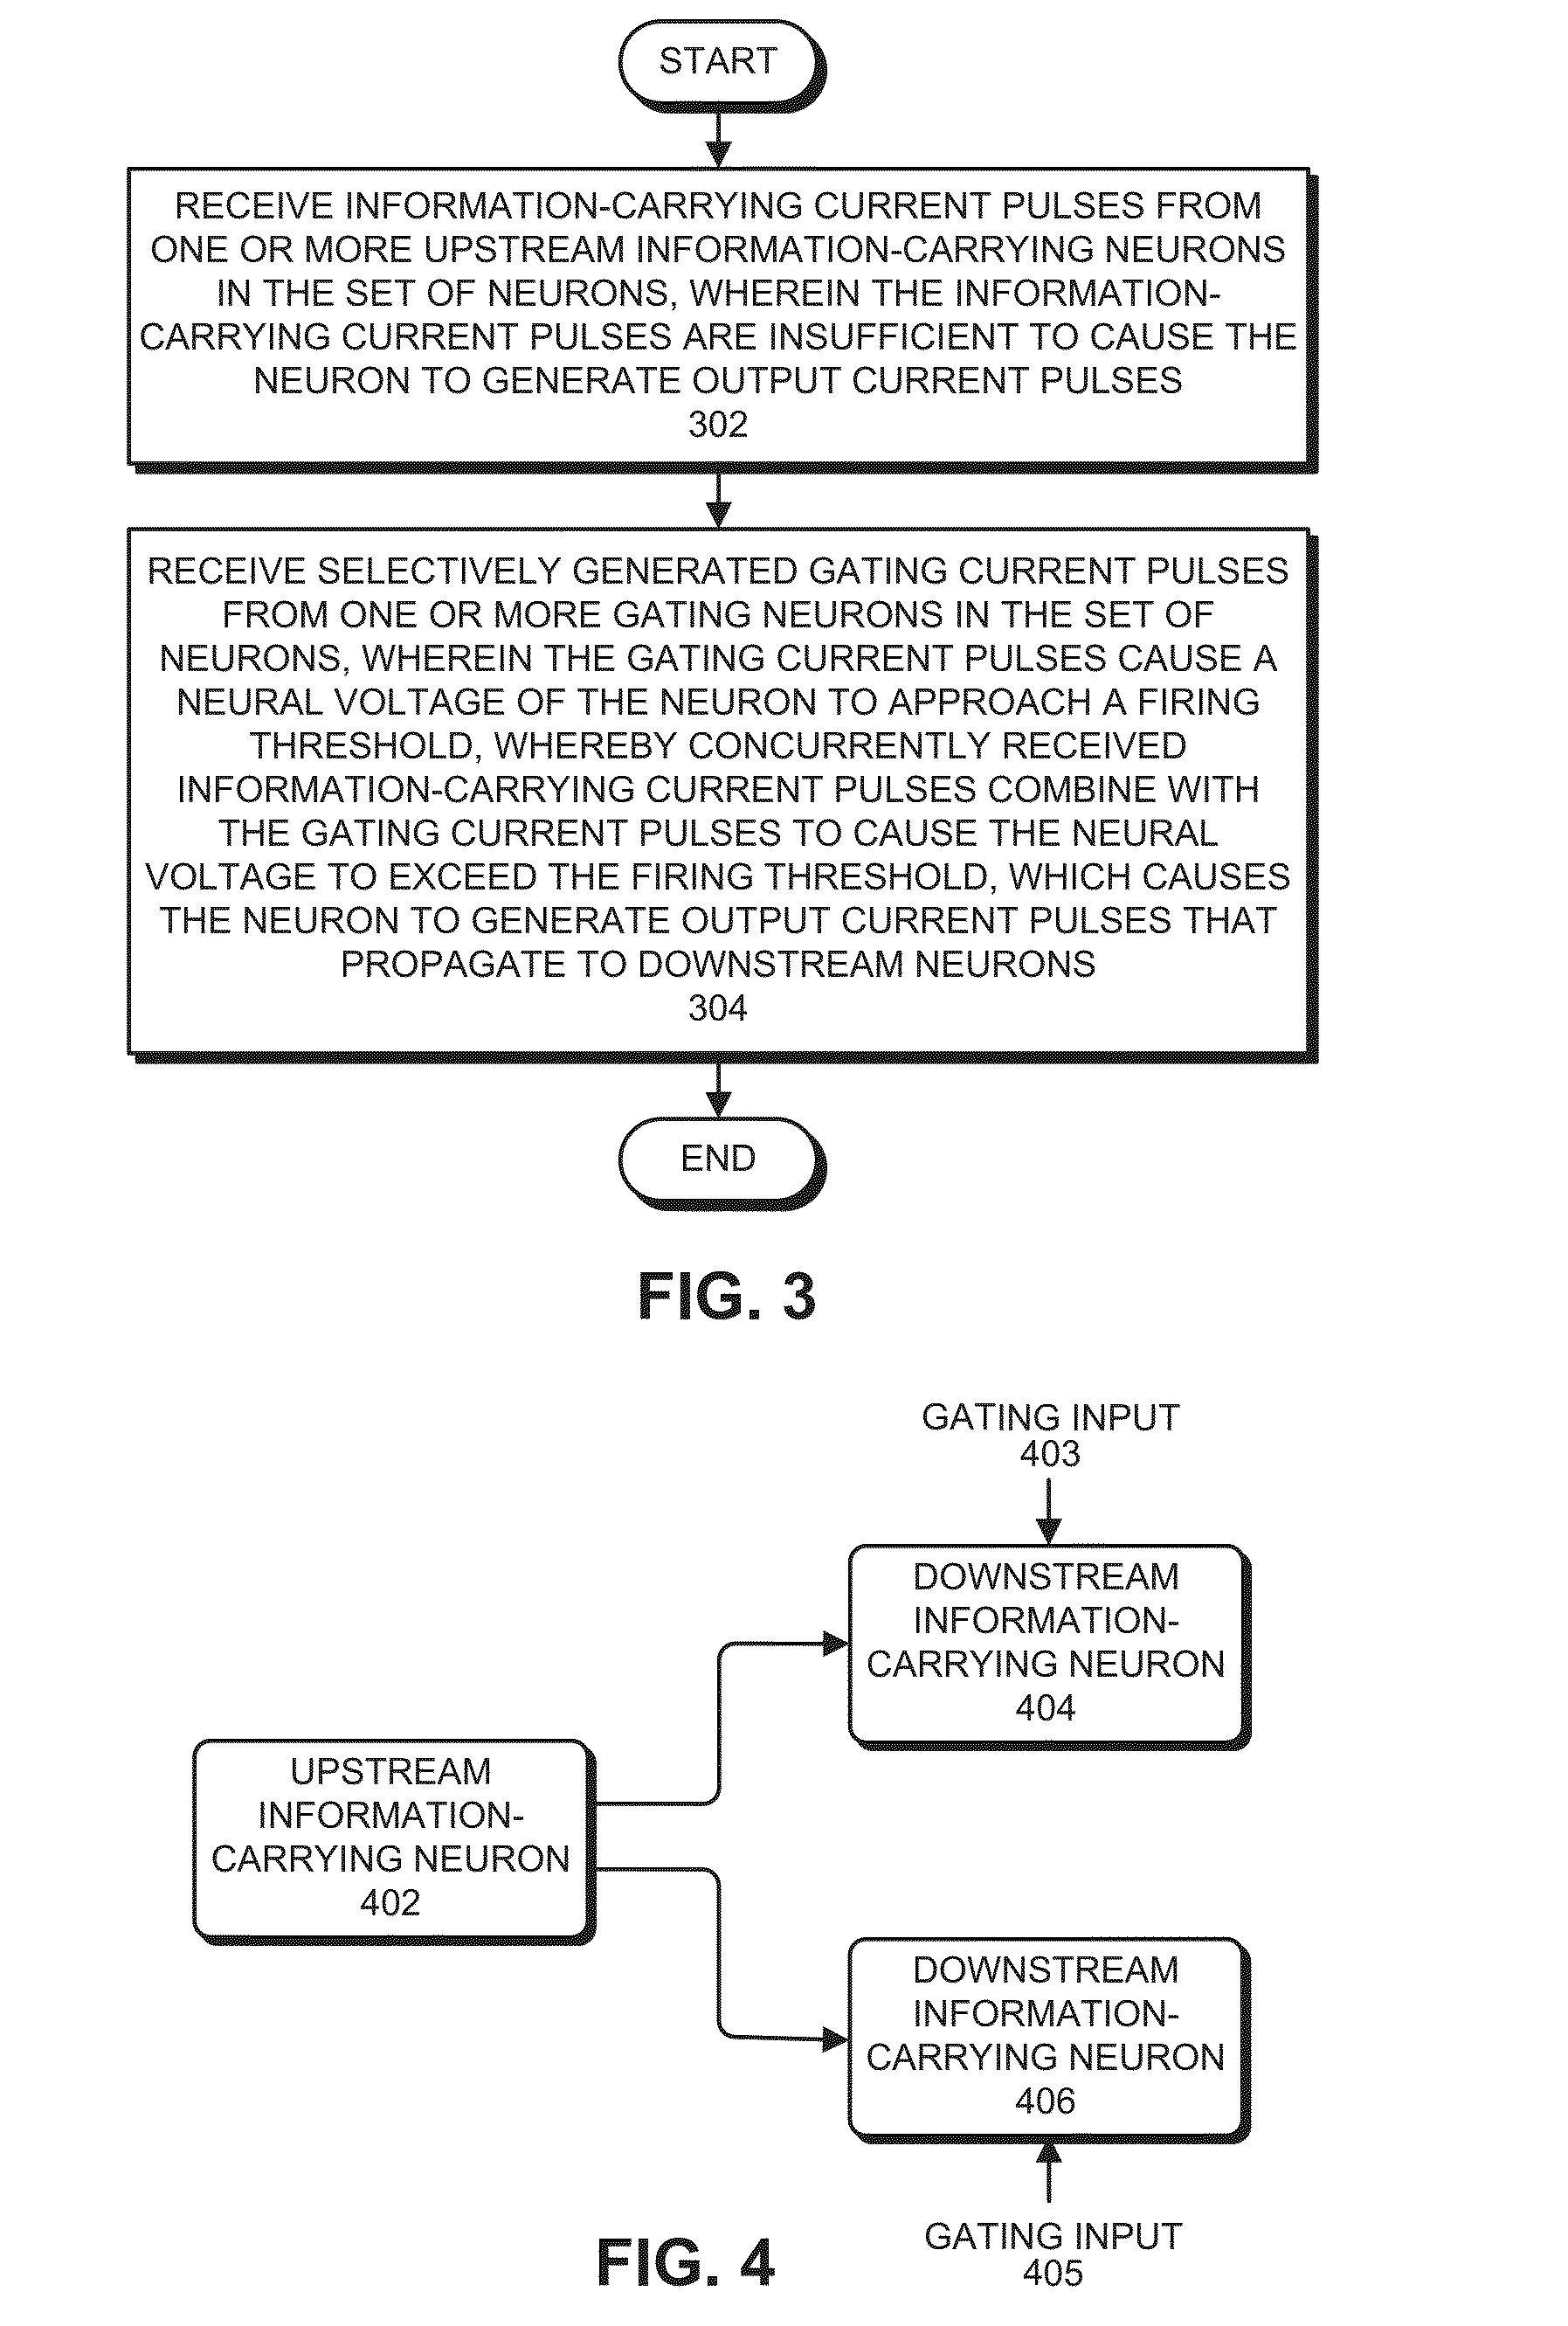 Neuromorphic circuit that facilitates information routing and processing